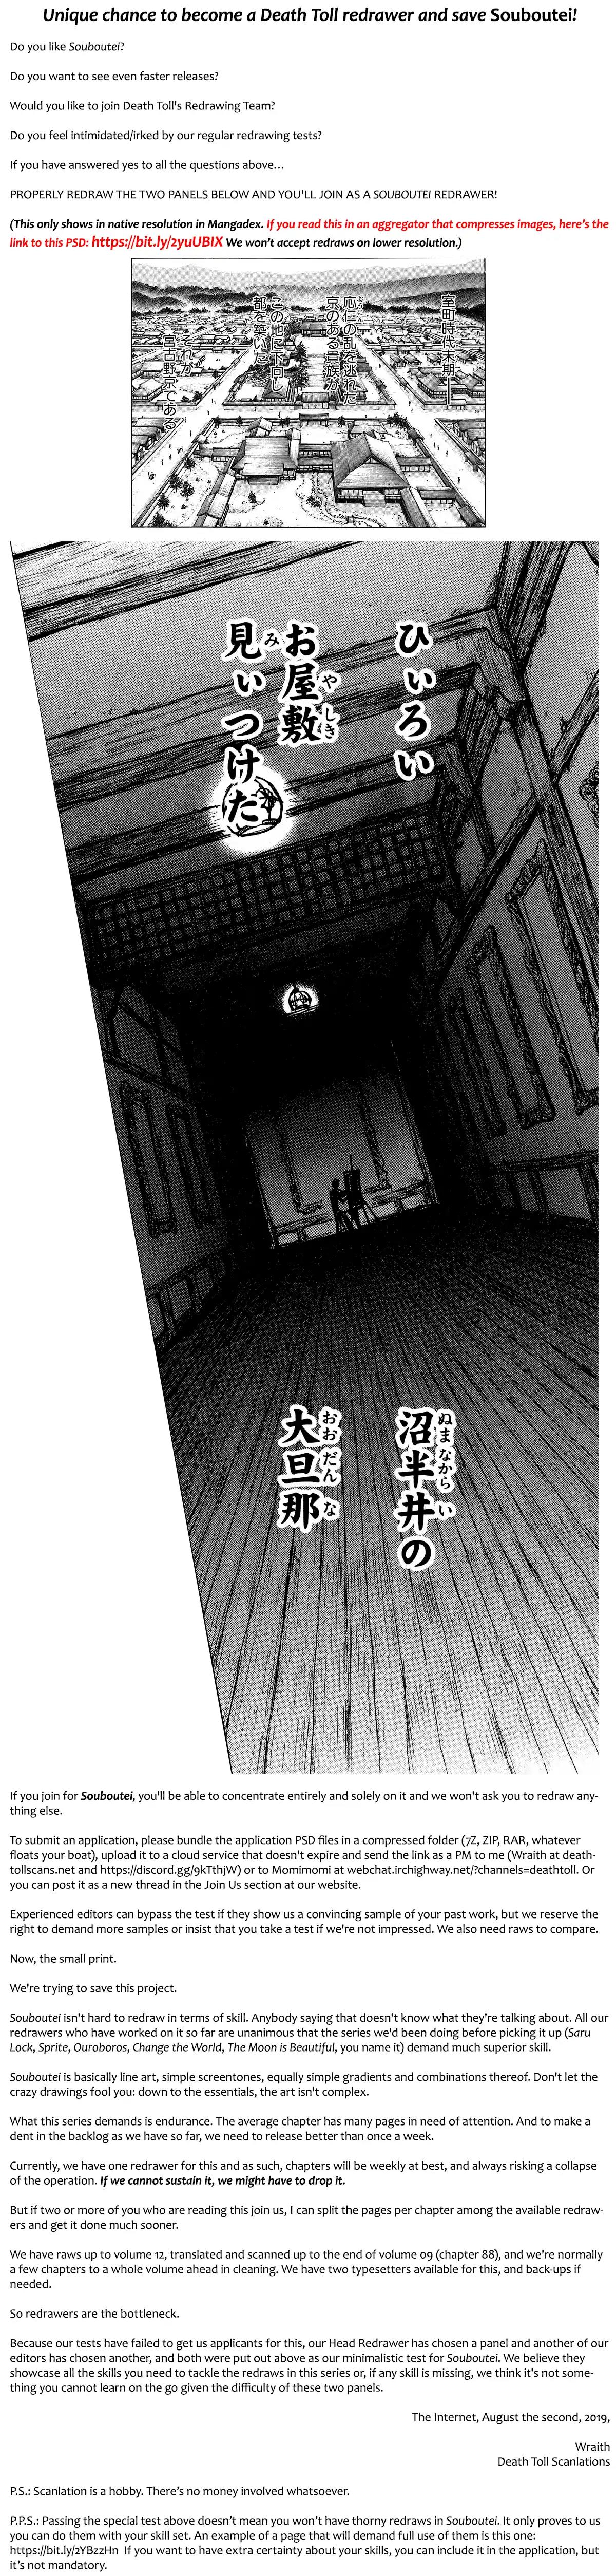 Souboutei Must Be Destroyed Chapter 75: